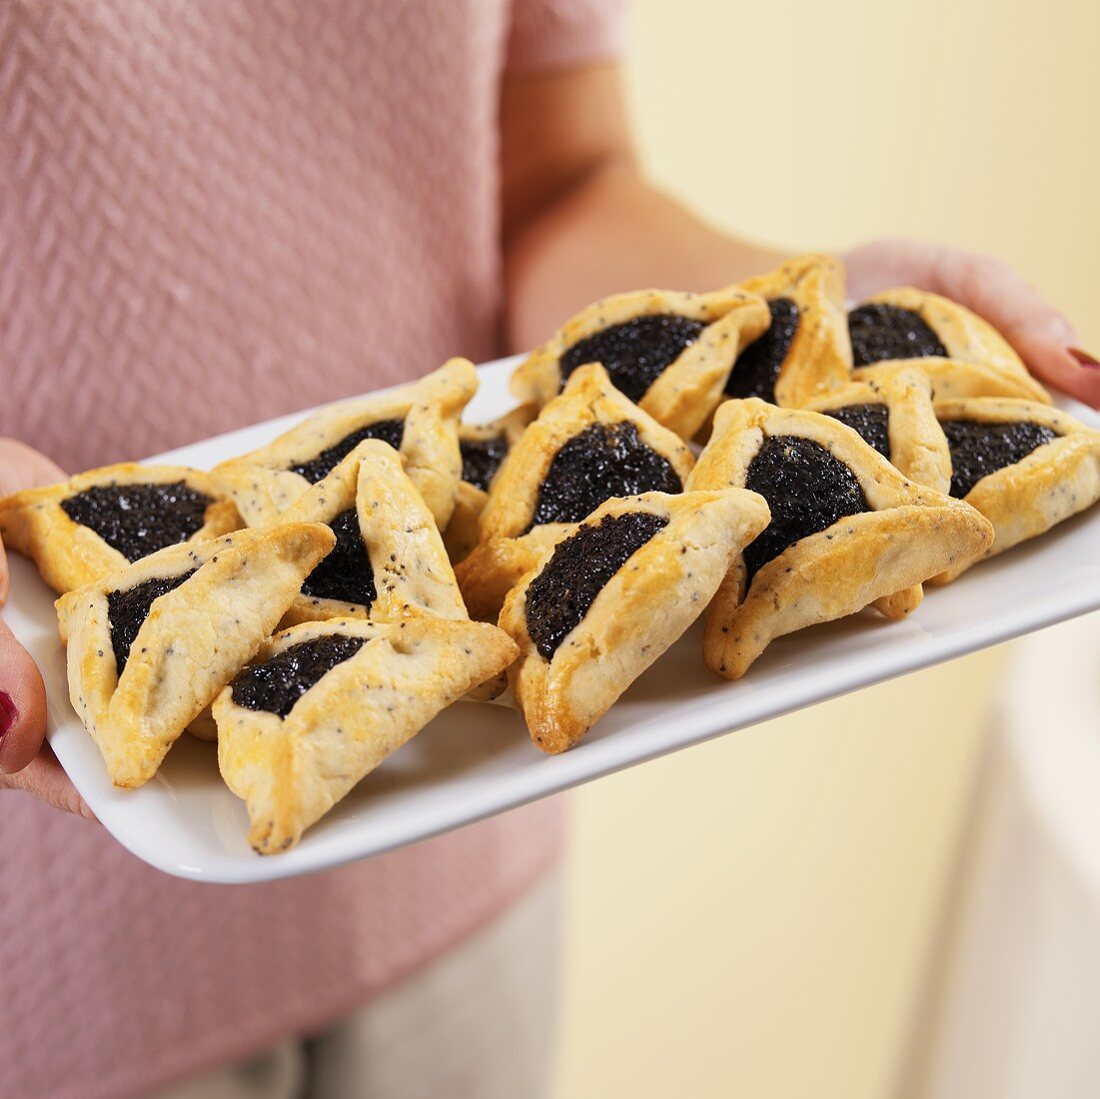 A person holding a tray of poppyseed turnovers